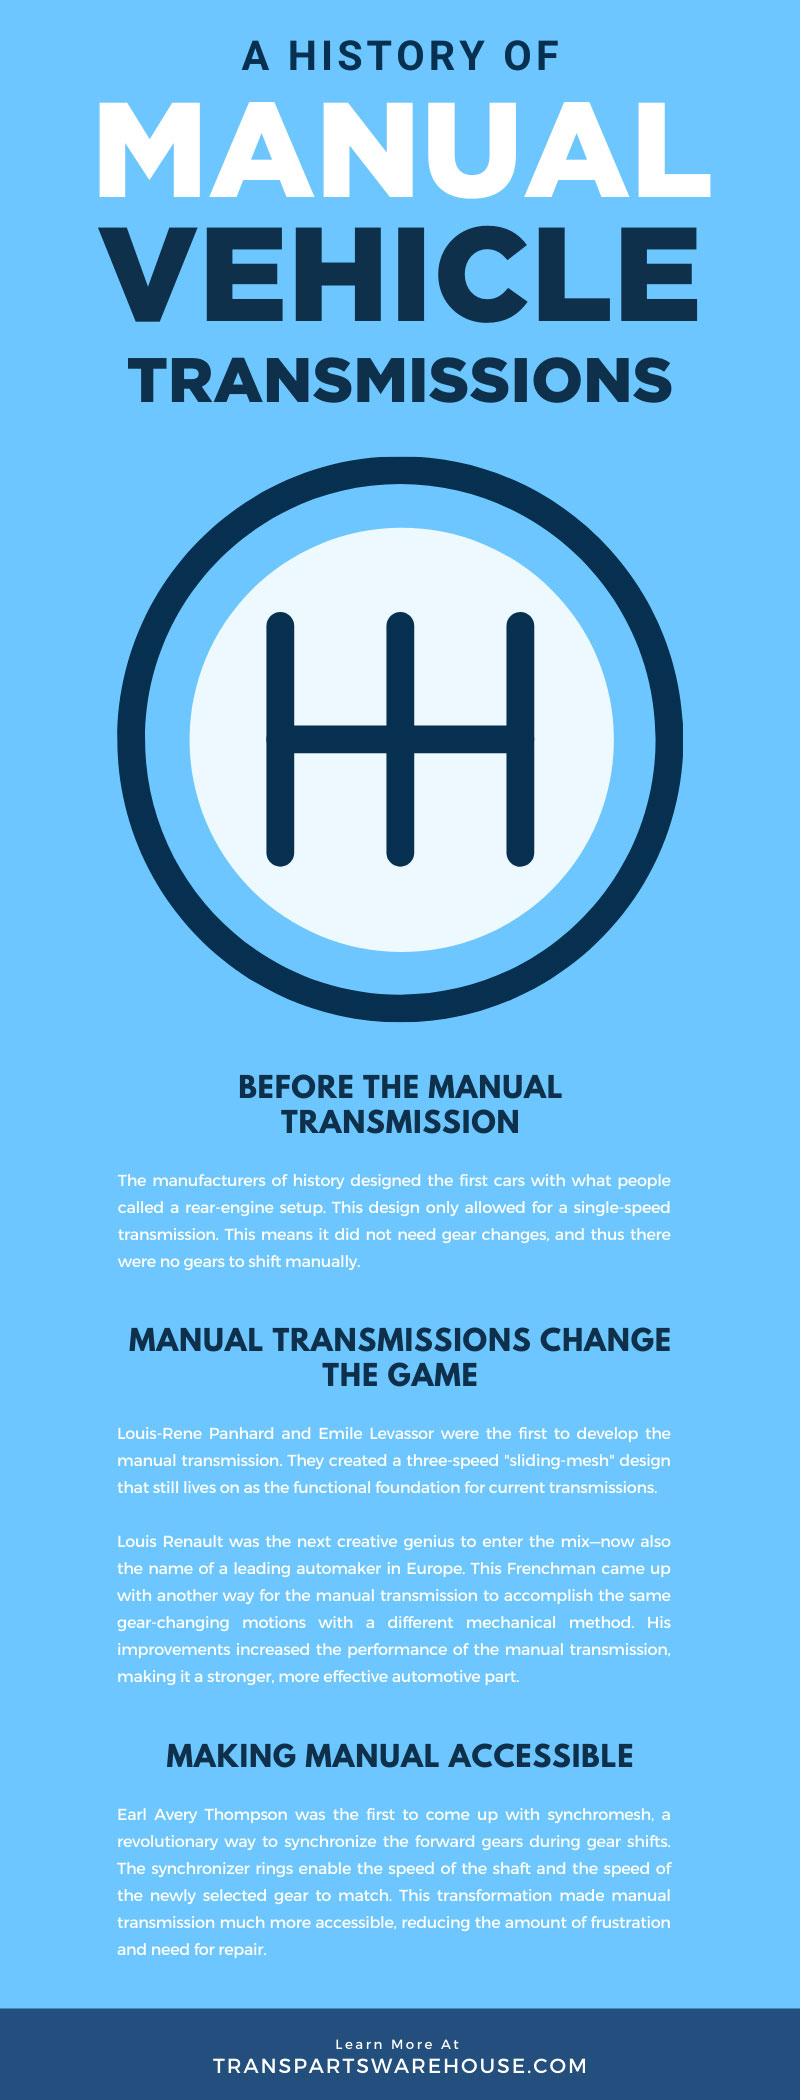 A History of Manual Vehicle Transmissions